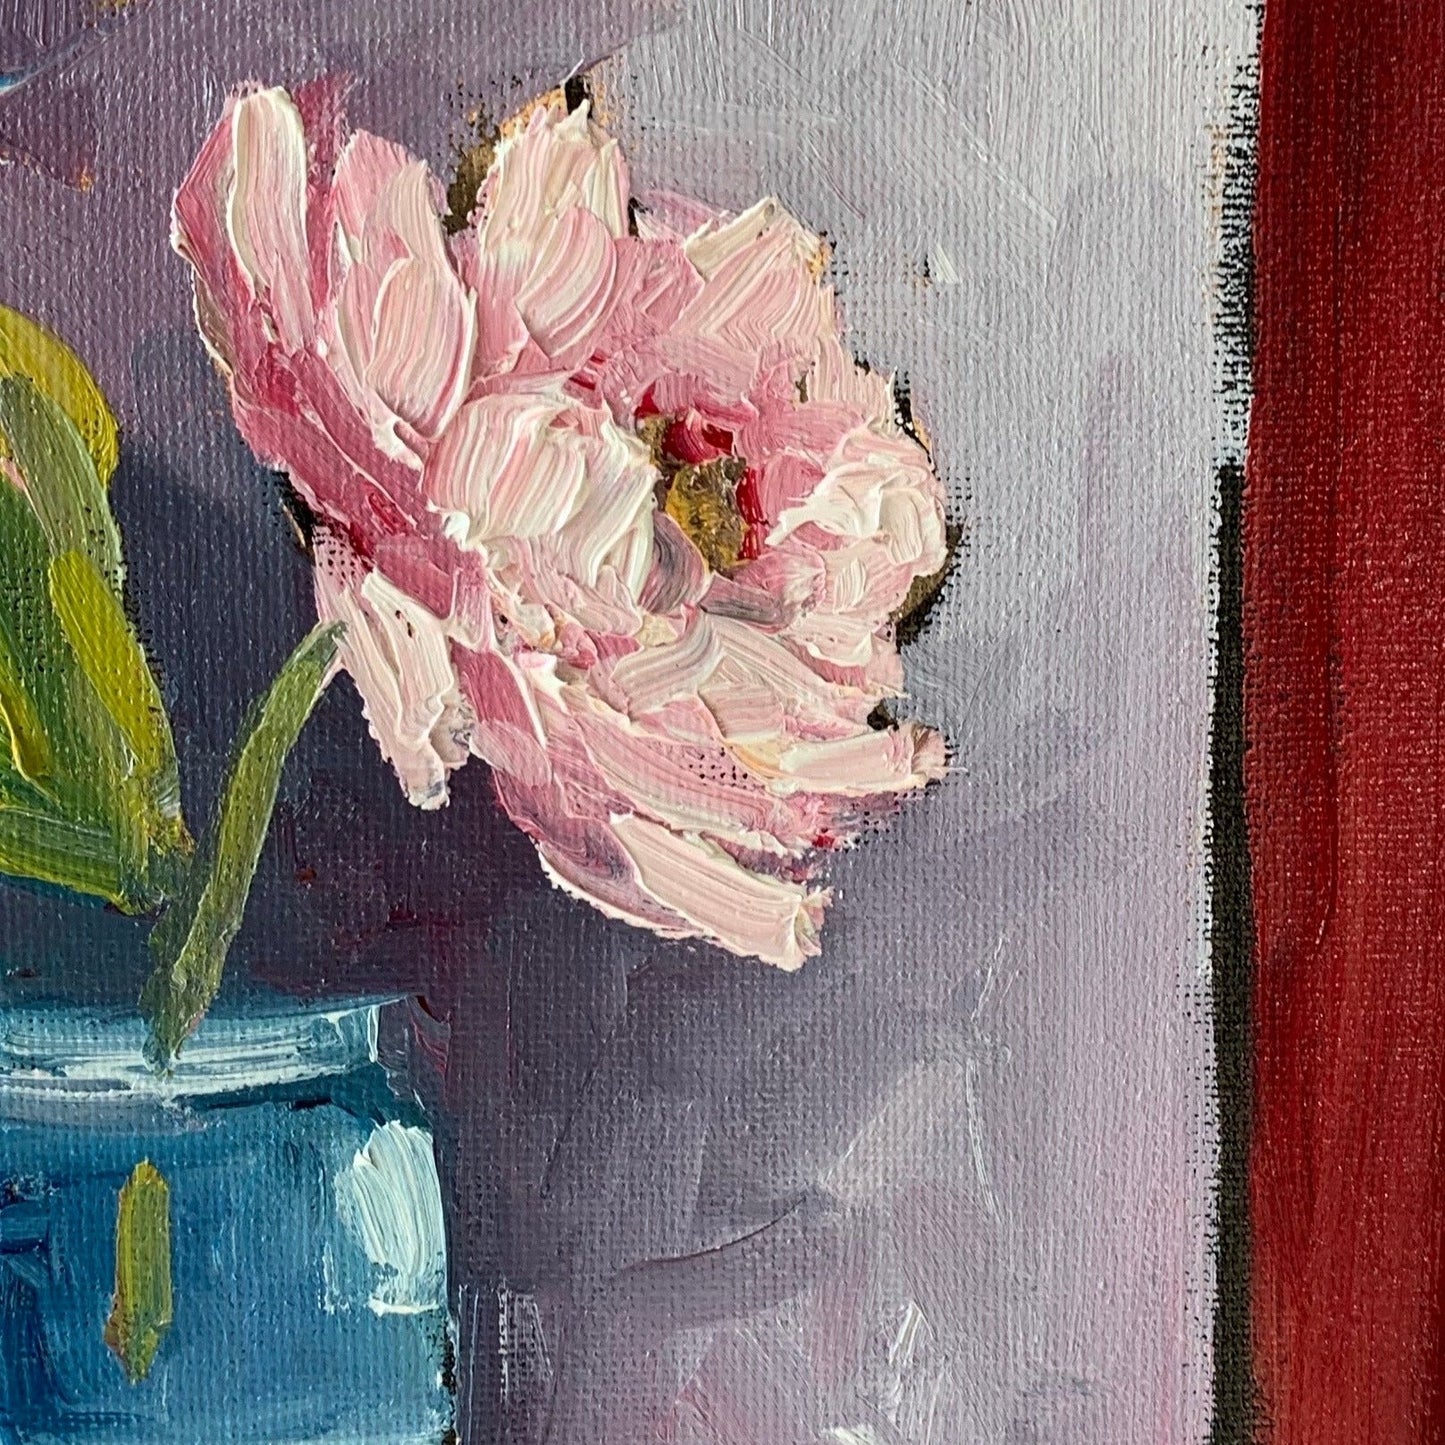 Abstract Flower Painting Workshop with Mary Espinosa - Saturday, Sept 9